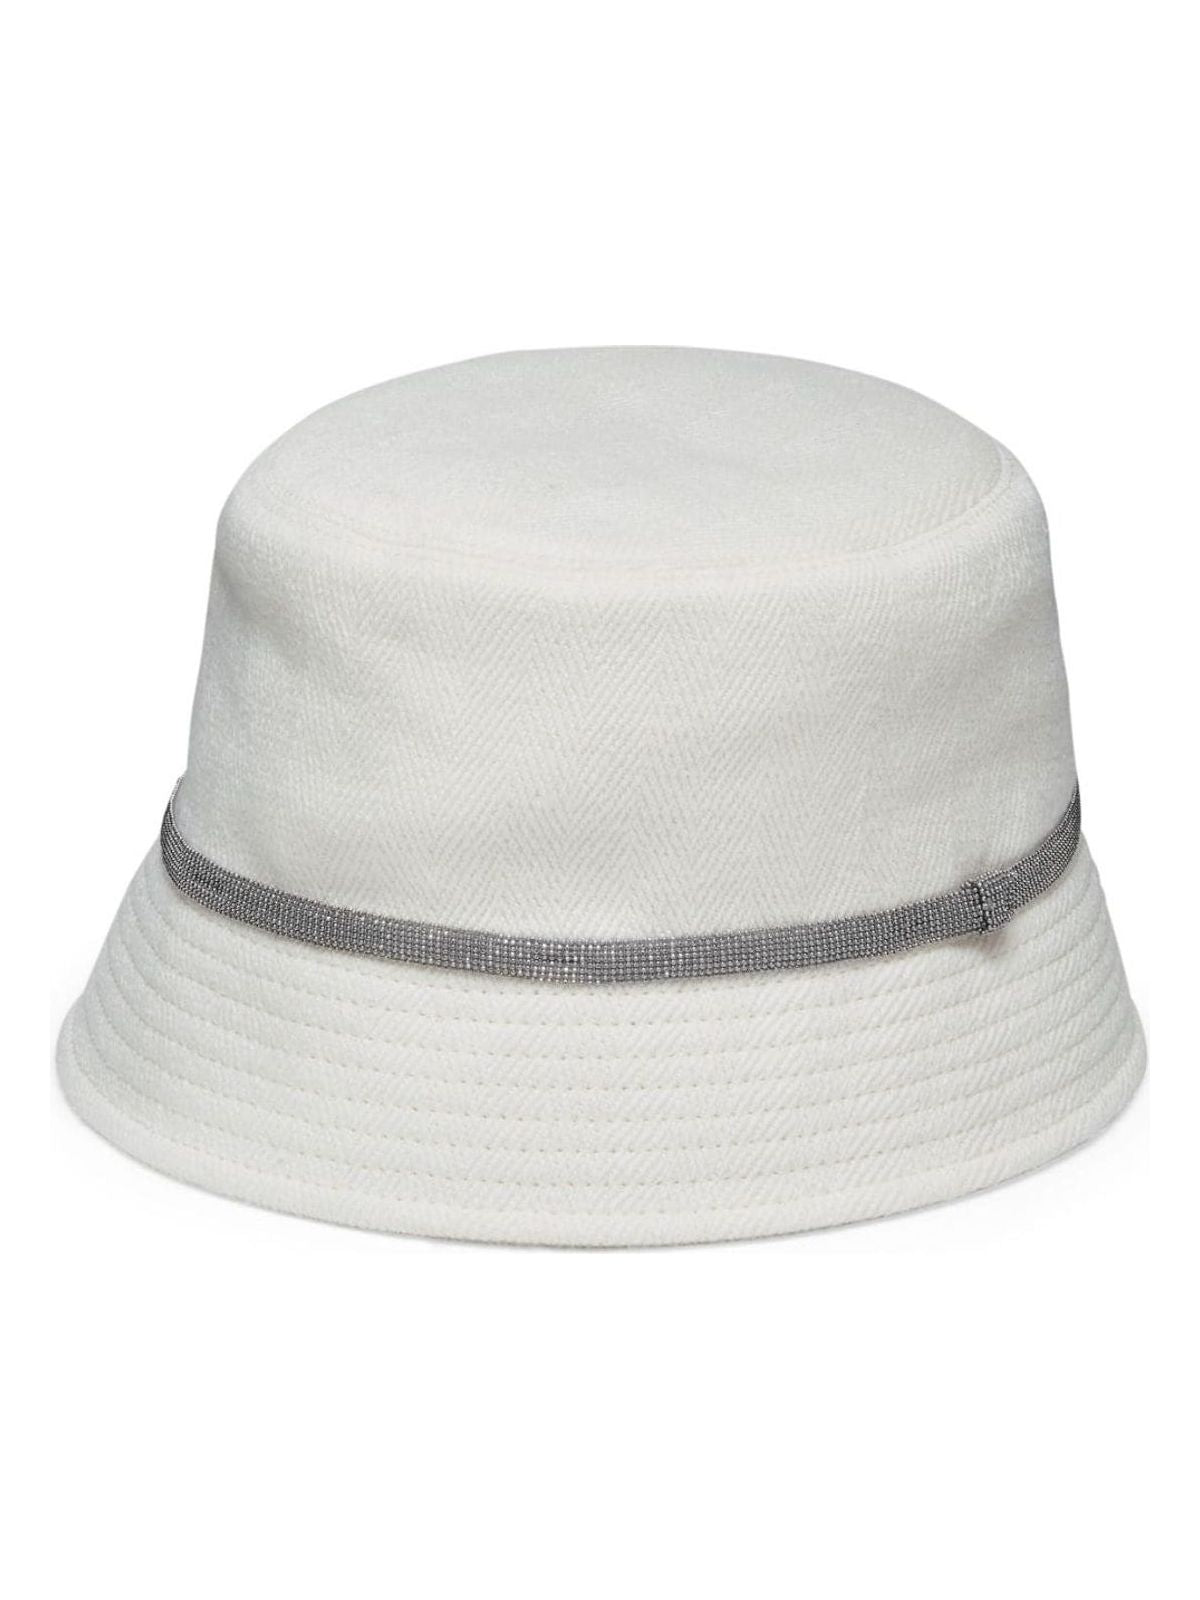 C001 BRUNELLO CUCINELLI LINEN AND COTTON BUCKET HAT WITH SHINY DETAILS